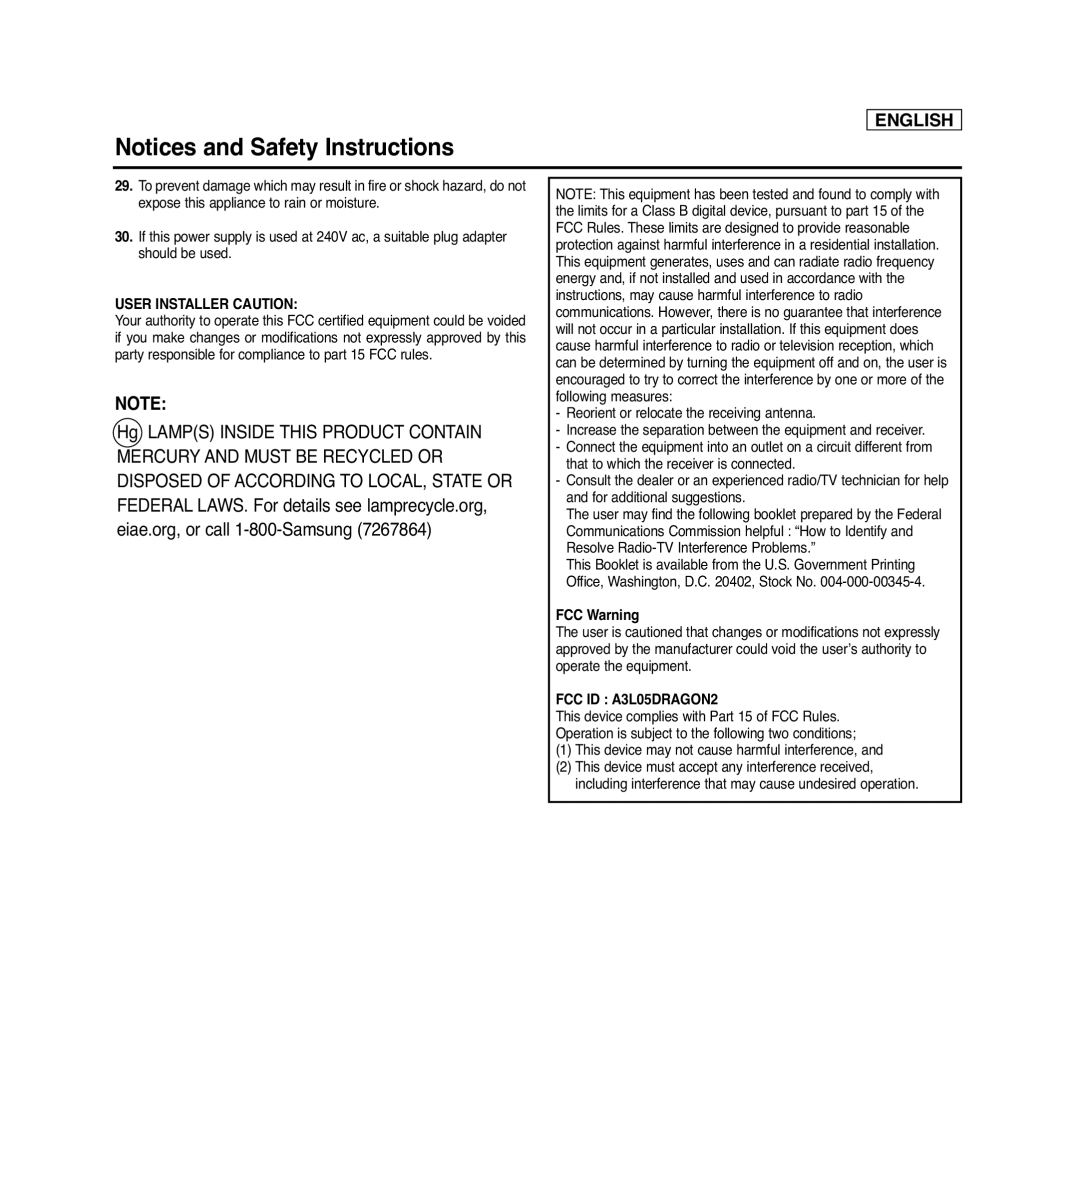 Samsung SC-D366 manual Notices and Safety Instructions, English, User Installer Caution, FCC Warning, FCC ID A3L05DRAGON2 